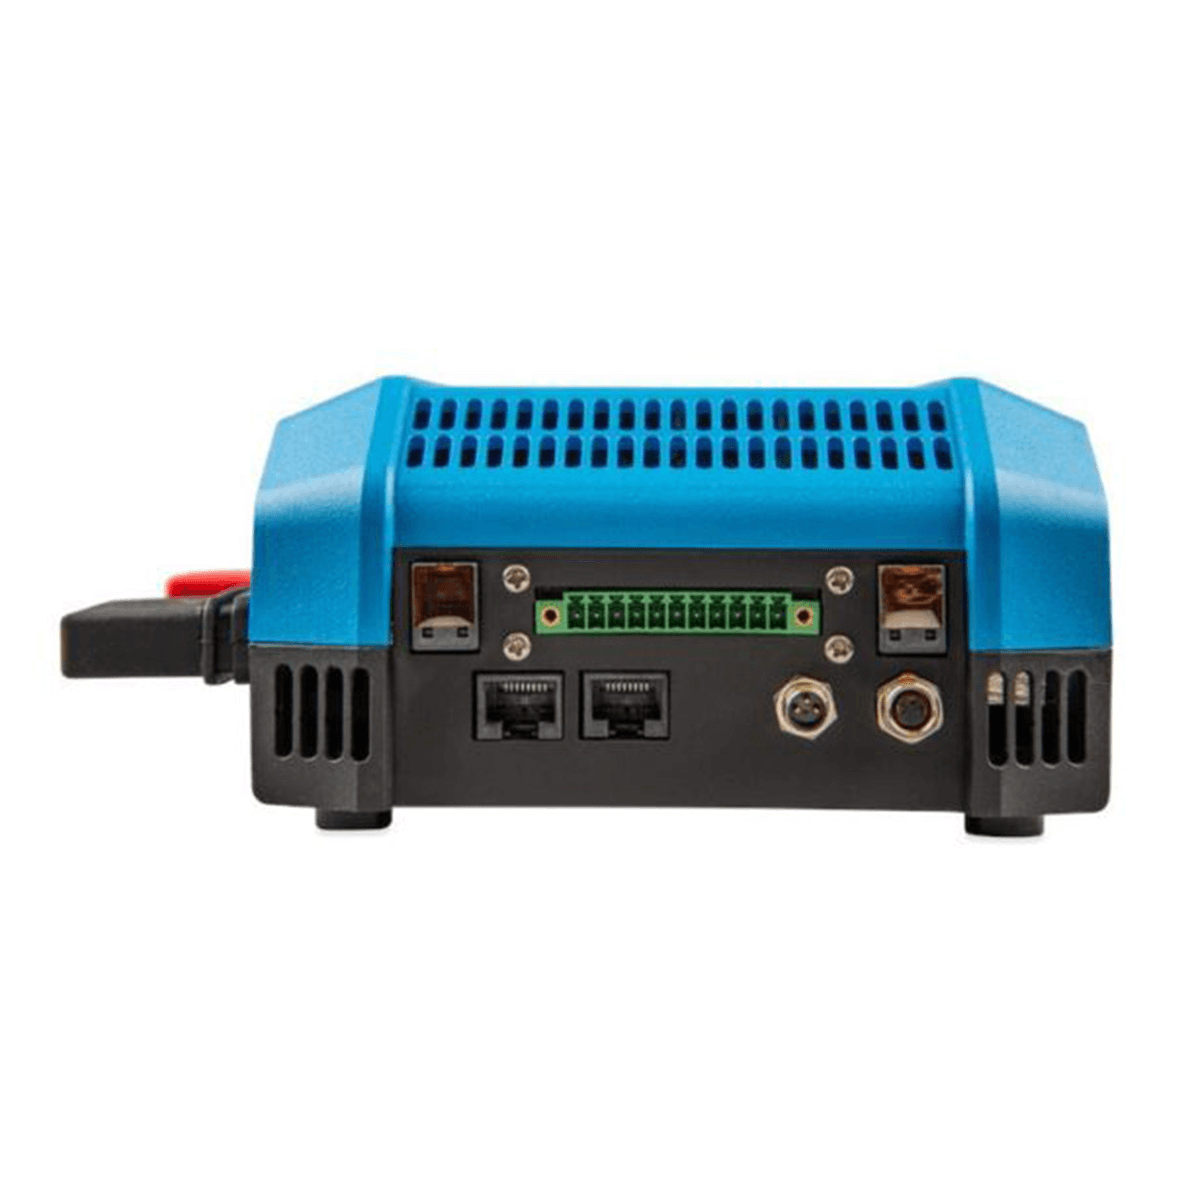 The Victron Lynx Smart BMS and Smart Shunt Battery Management - 500A is a blue and black electronic device with multiple ports and connectors on the front.